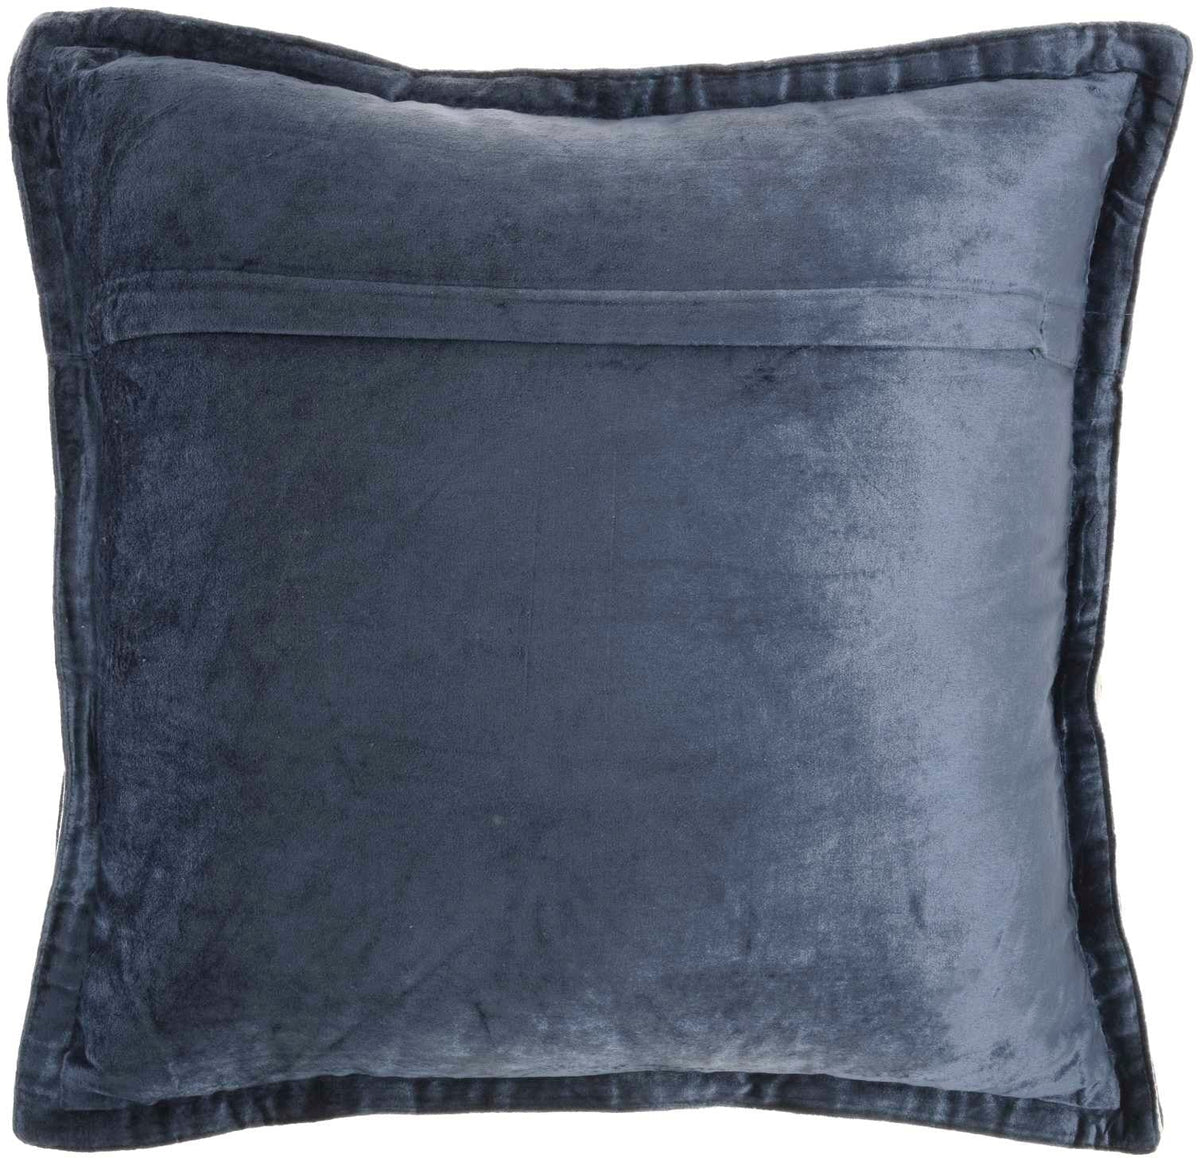 Solene 20" x 20" Blue Throw Pillow - Elegance Collection